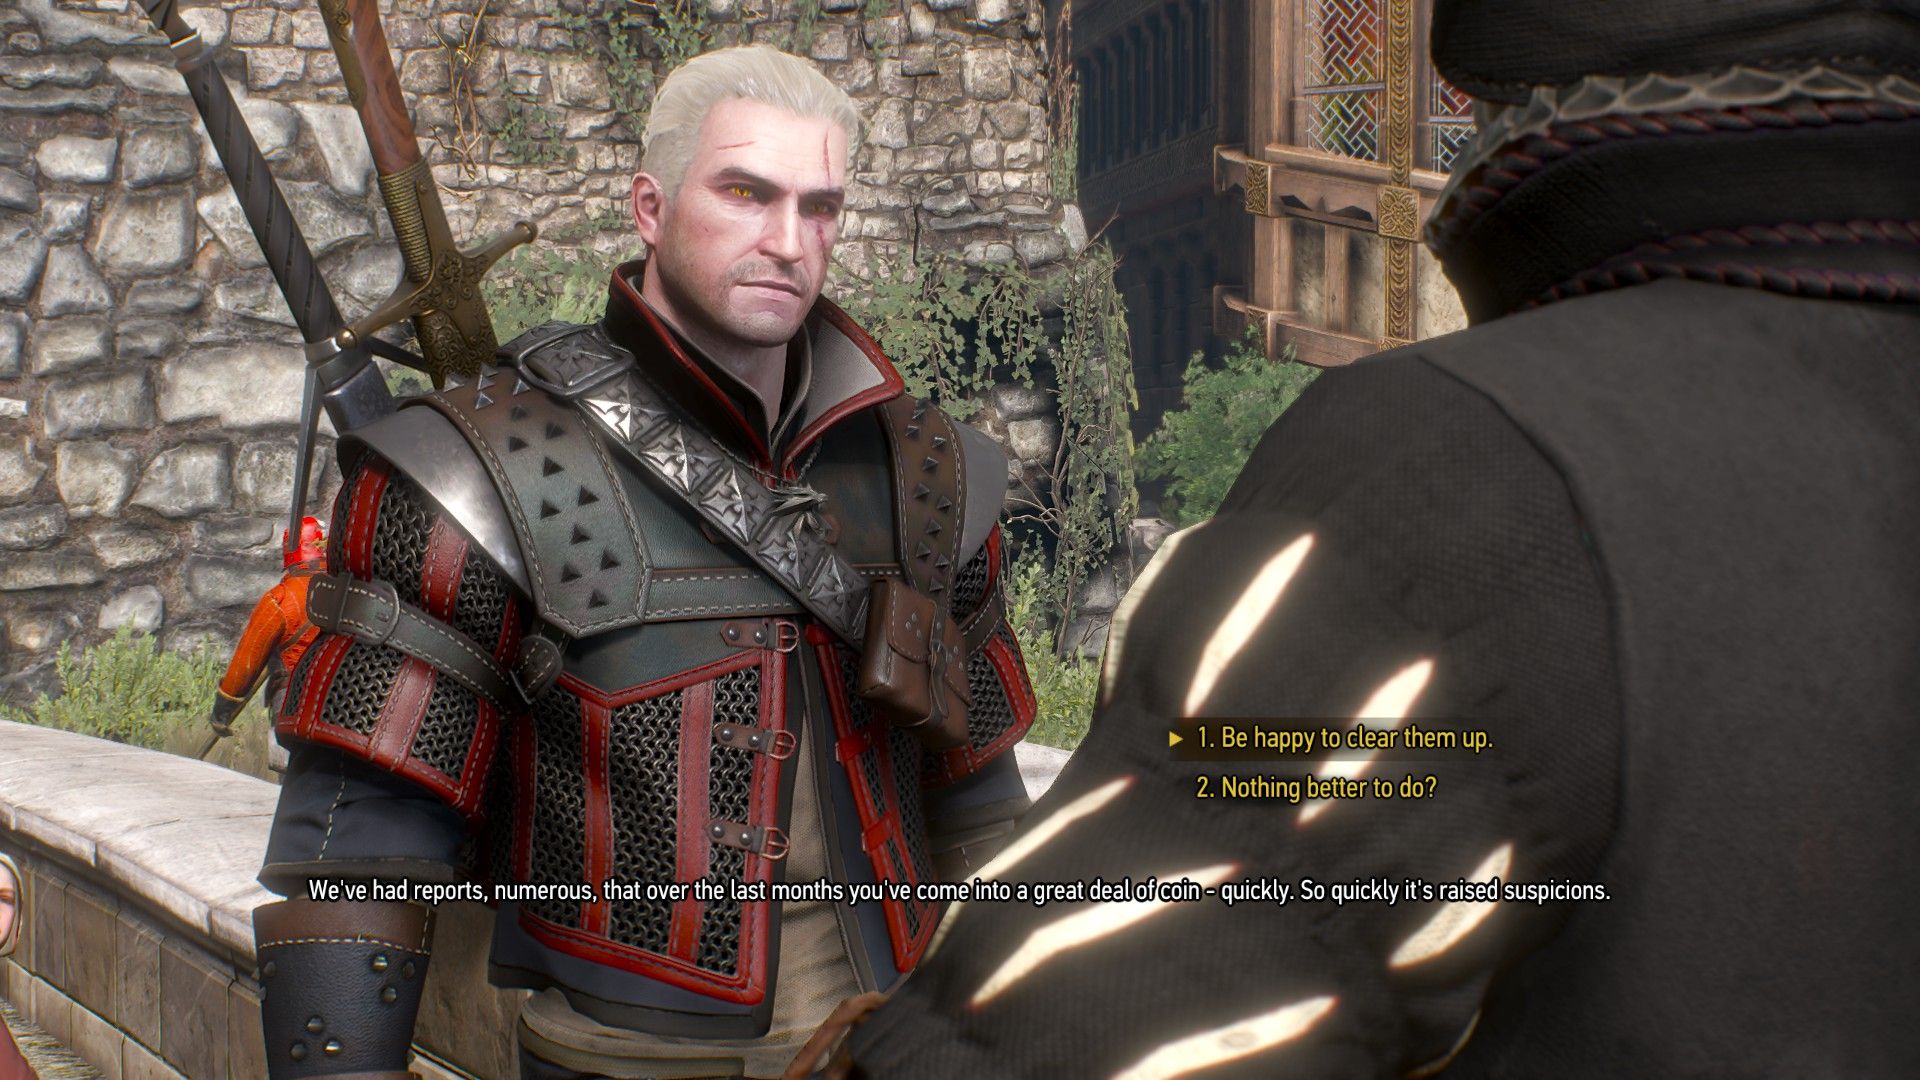 Screenshot of a dialog menu from The Witcher 3 that presents the player with two choices.